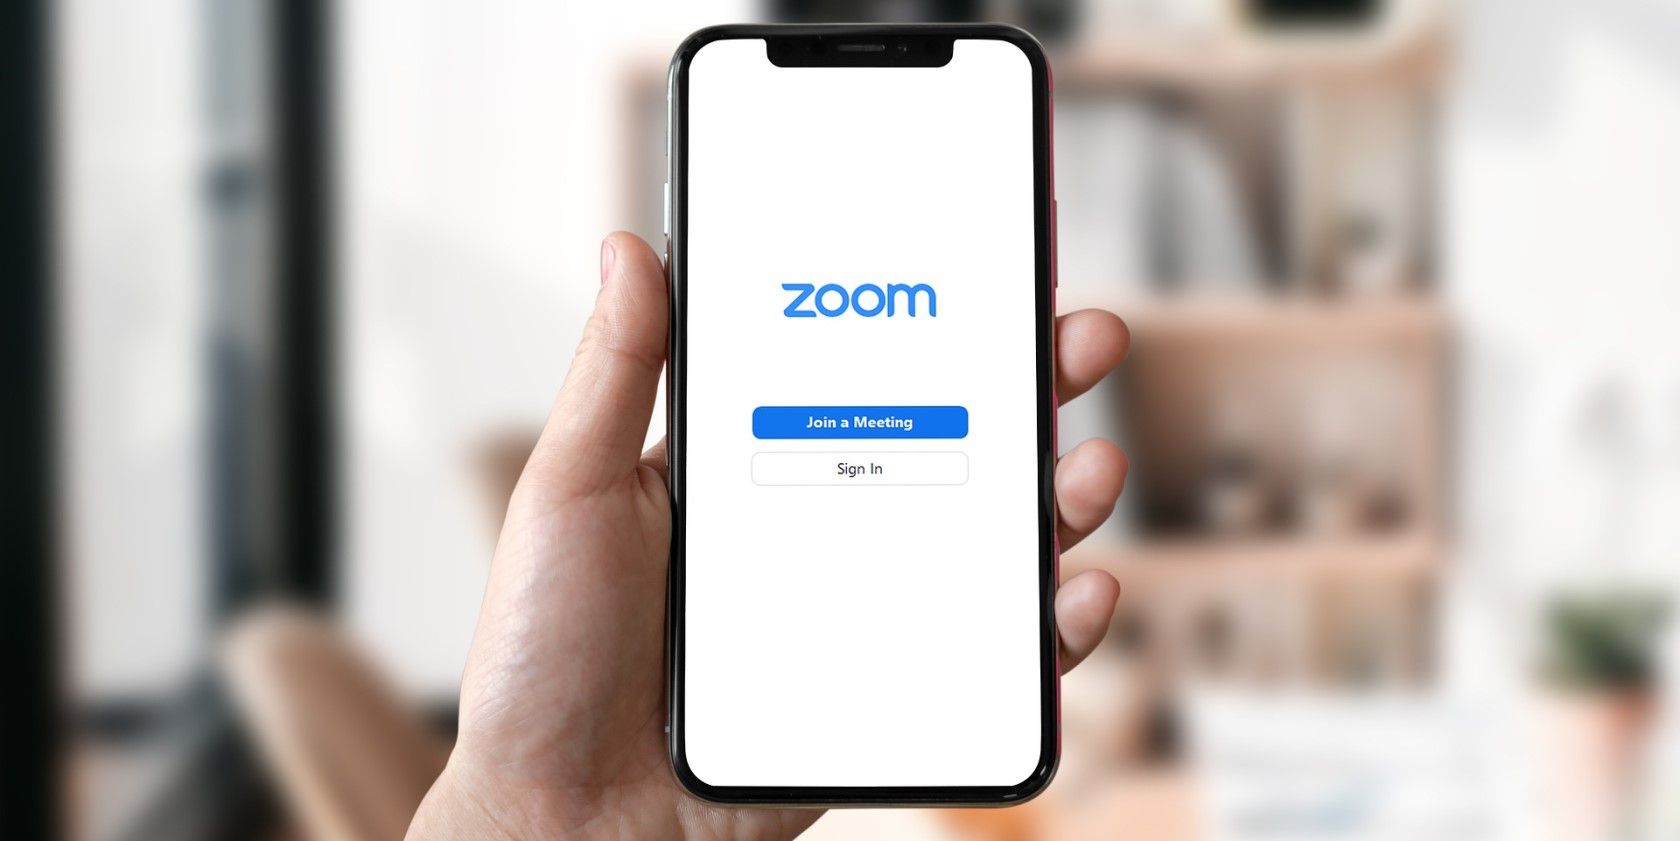 Zoom app on a smartphone